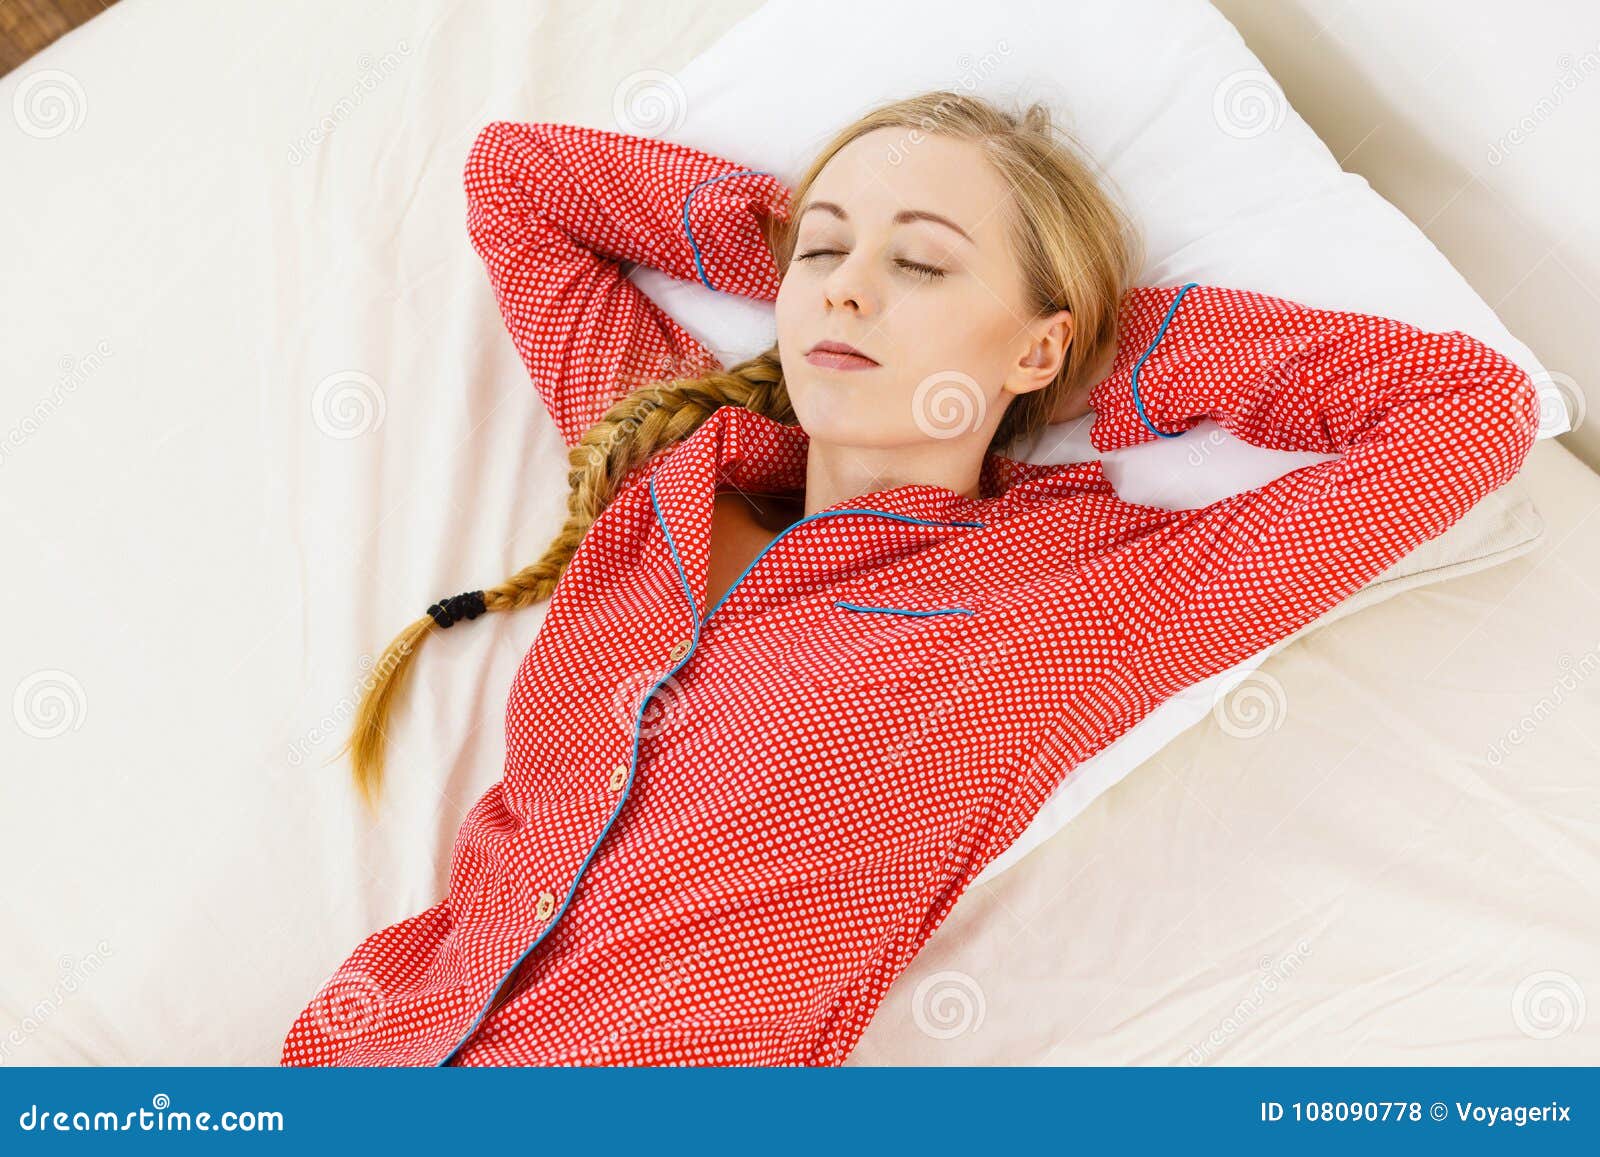 woman sleeping in bed on back